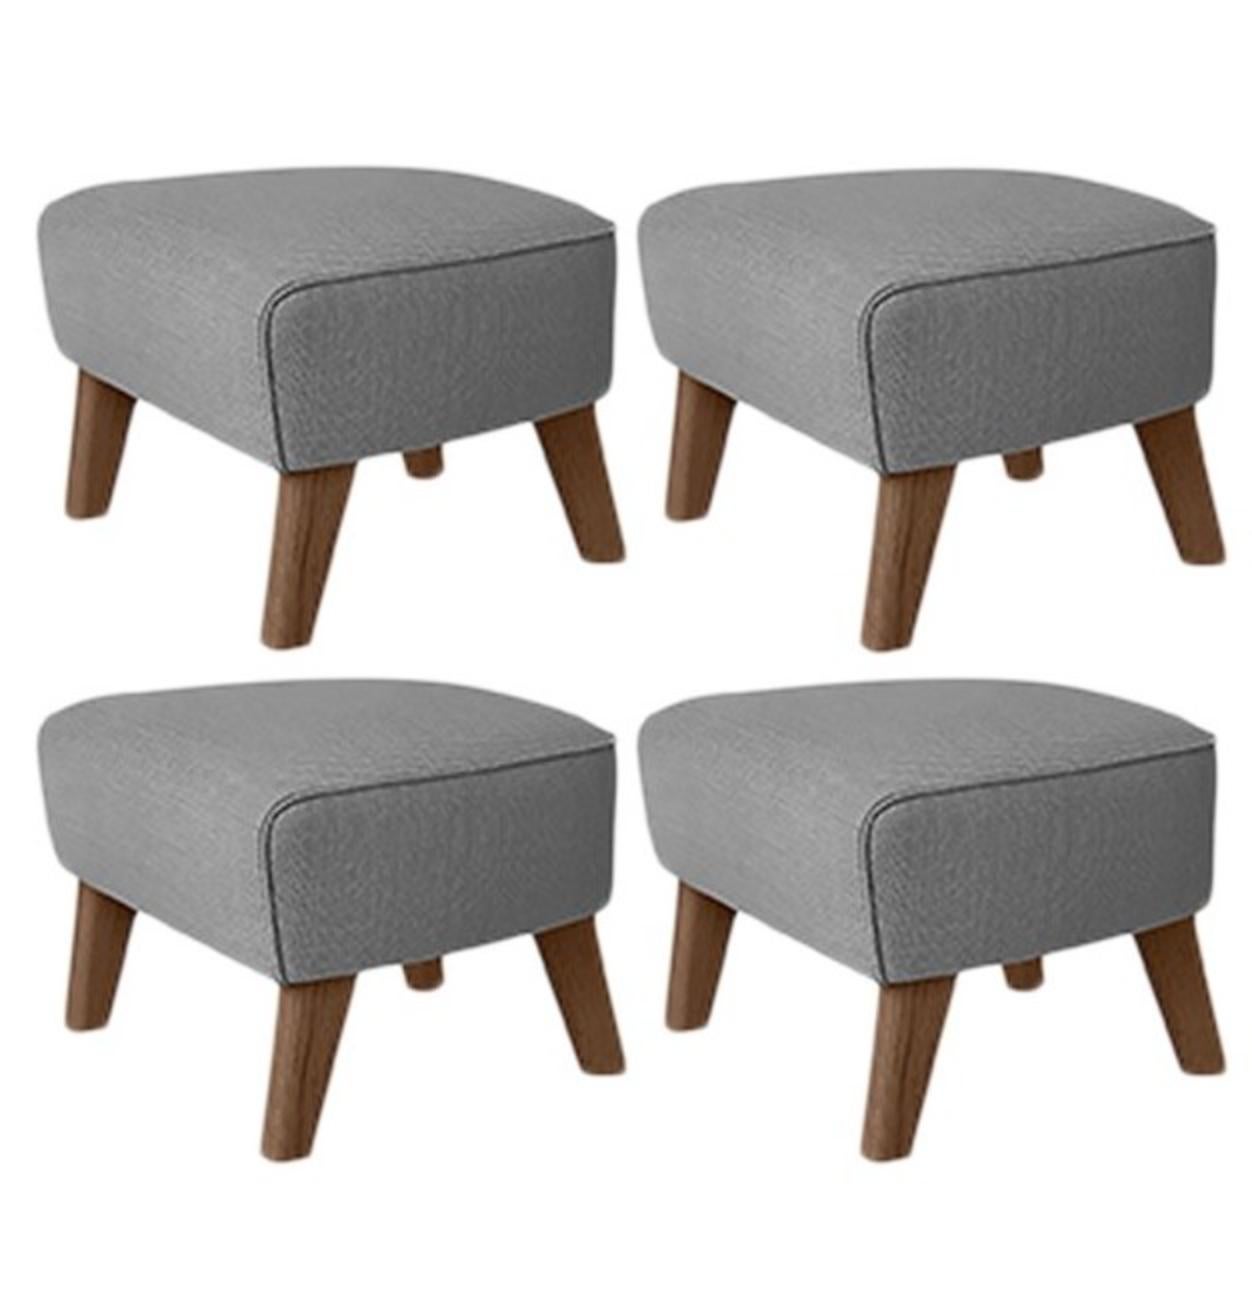 Set of 4 grey and smoked oak Raf Simons Vidar 3 my own chair footstool by Lassen.
Dimensions: W 56 x D 58 x H 40 cm 
Materials: Textile
Also available: Other colors available.

The my own chair footstool has been designed in the same spirit as